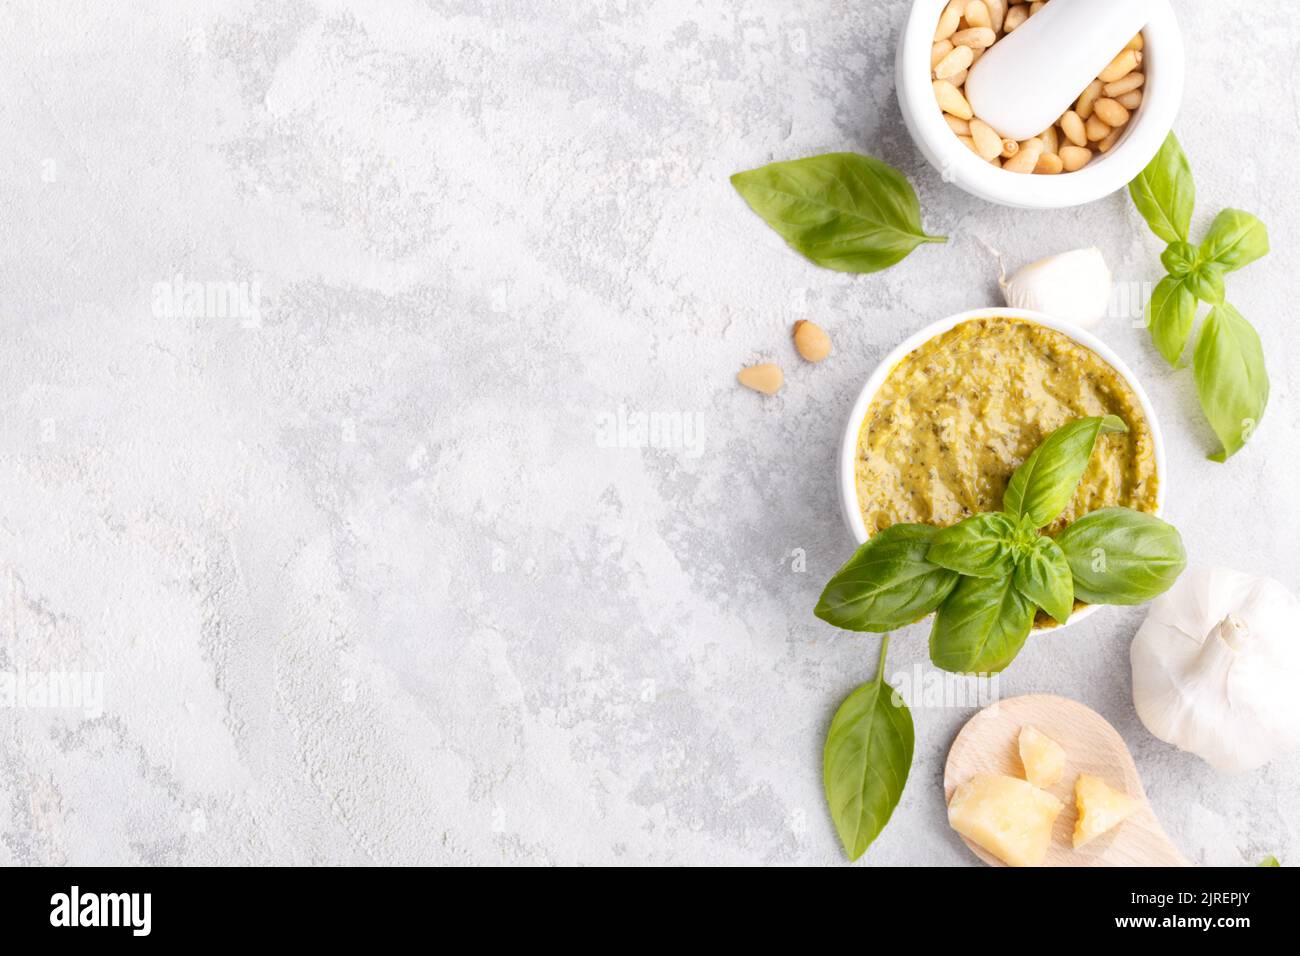 Pesto sauce and ingredients, black cheese board, basil, garlic, pine nuts, olive oil on grey stone background with copy space Stock Photo